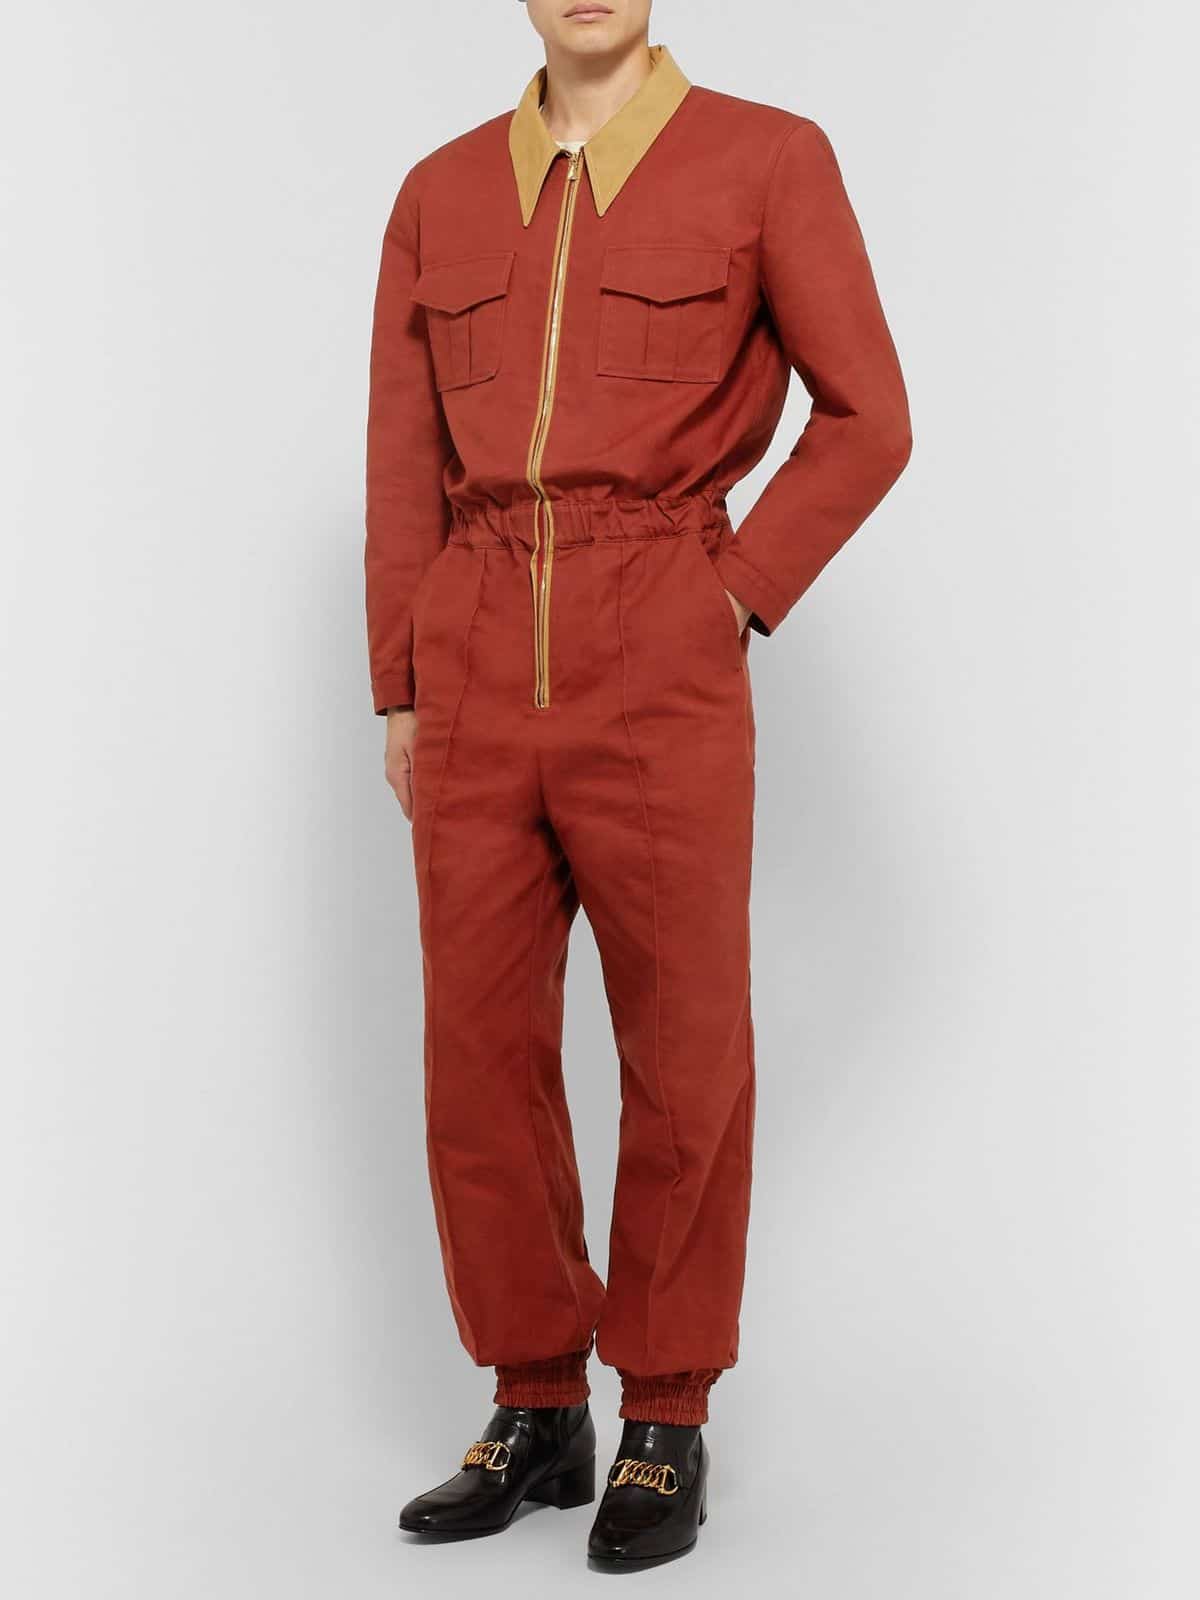 Gucci Tapered Cotton-Canvas Boilersuit for Men